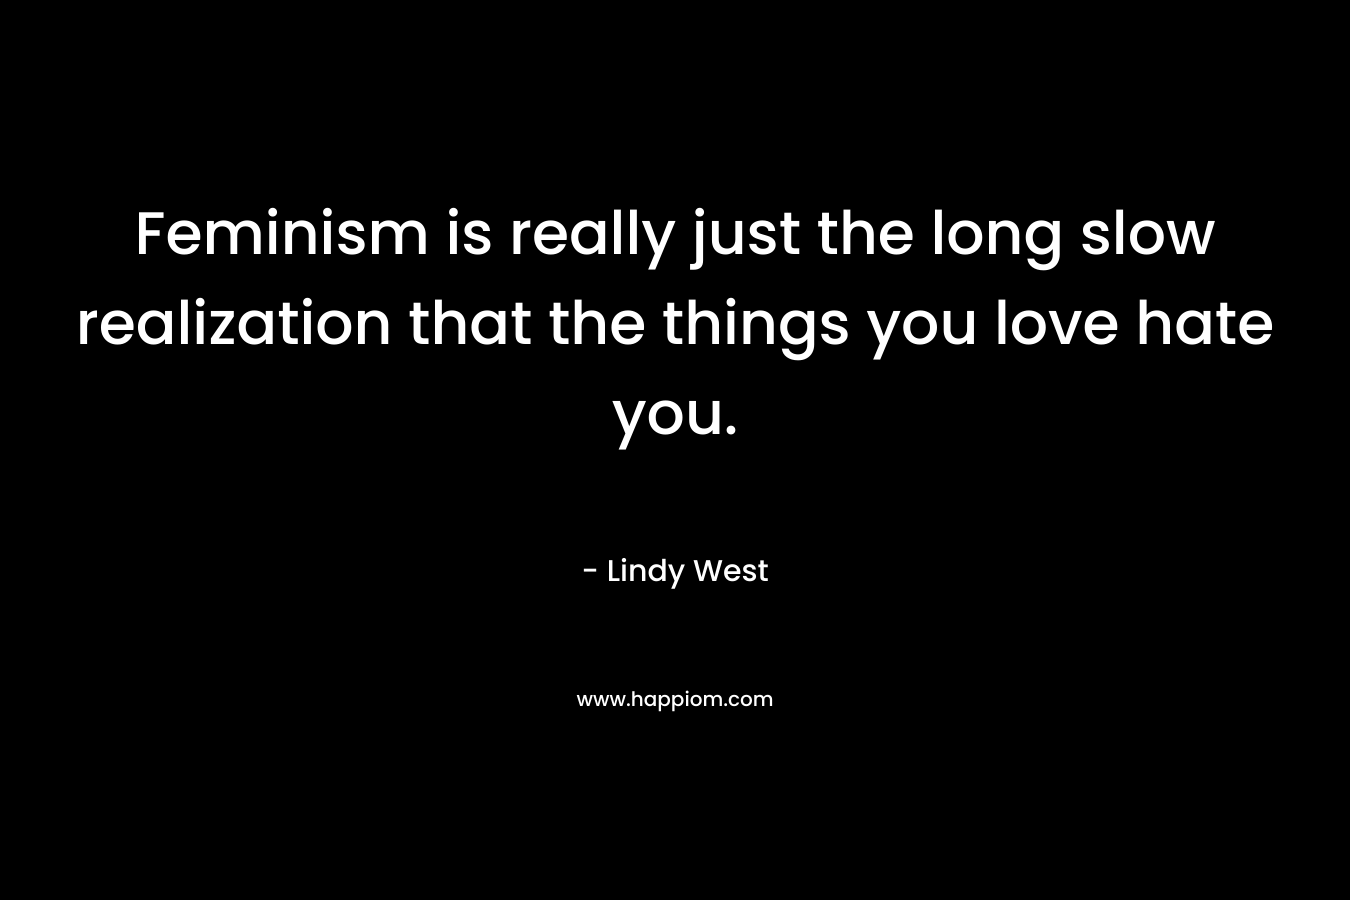 Feminism is really just the long slow realization that the things you love hate you. – Lindy West